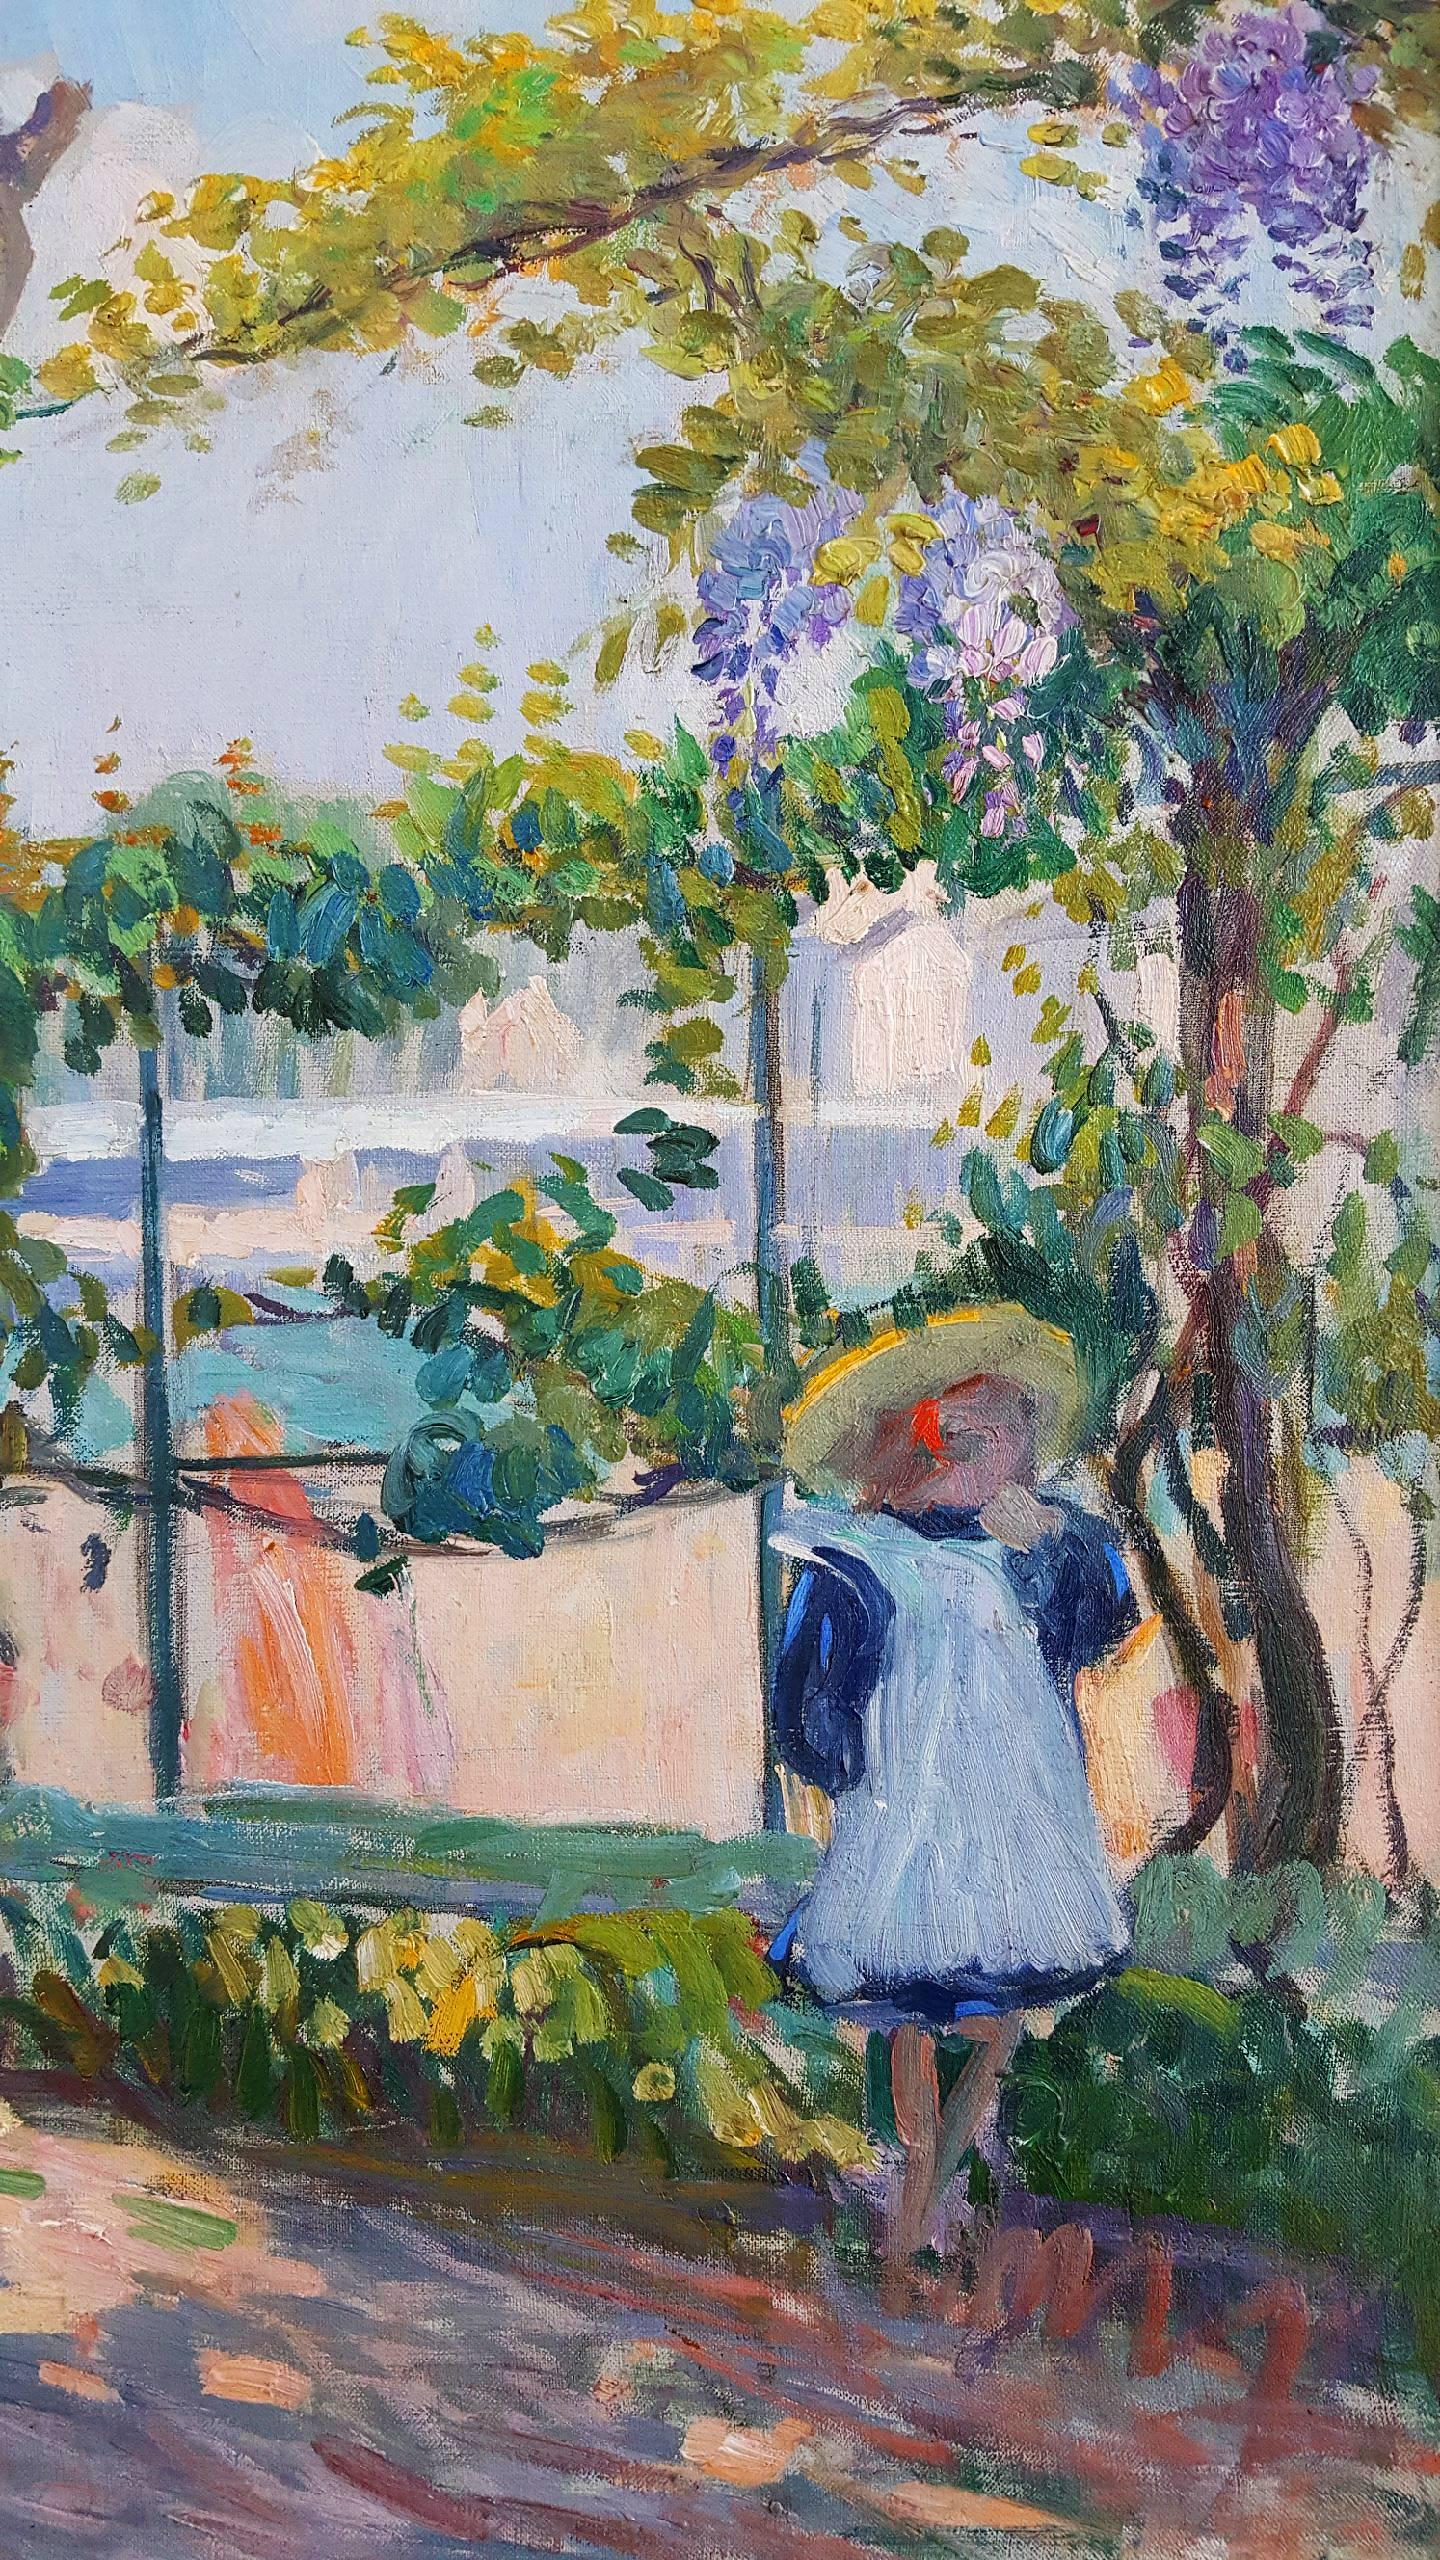 Le Jardin de Lagny 
 Provenance: Arthur Tooth, London Radon Gallery, NY 
This beautiful evocation of a lyrical French landscape is a fine example of of Post-Impressionism
Signature
Signed lower left
Catalog raisonné by Mme. Denise Bazetoux
